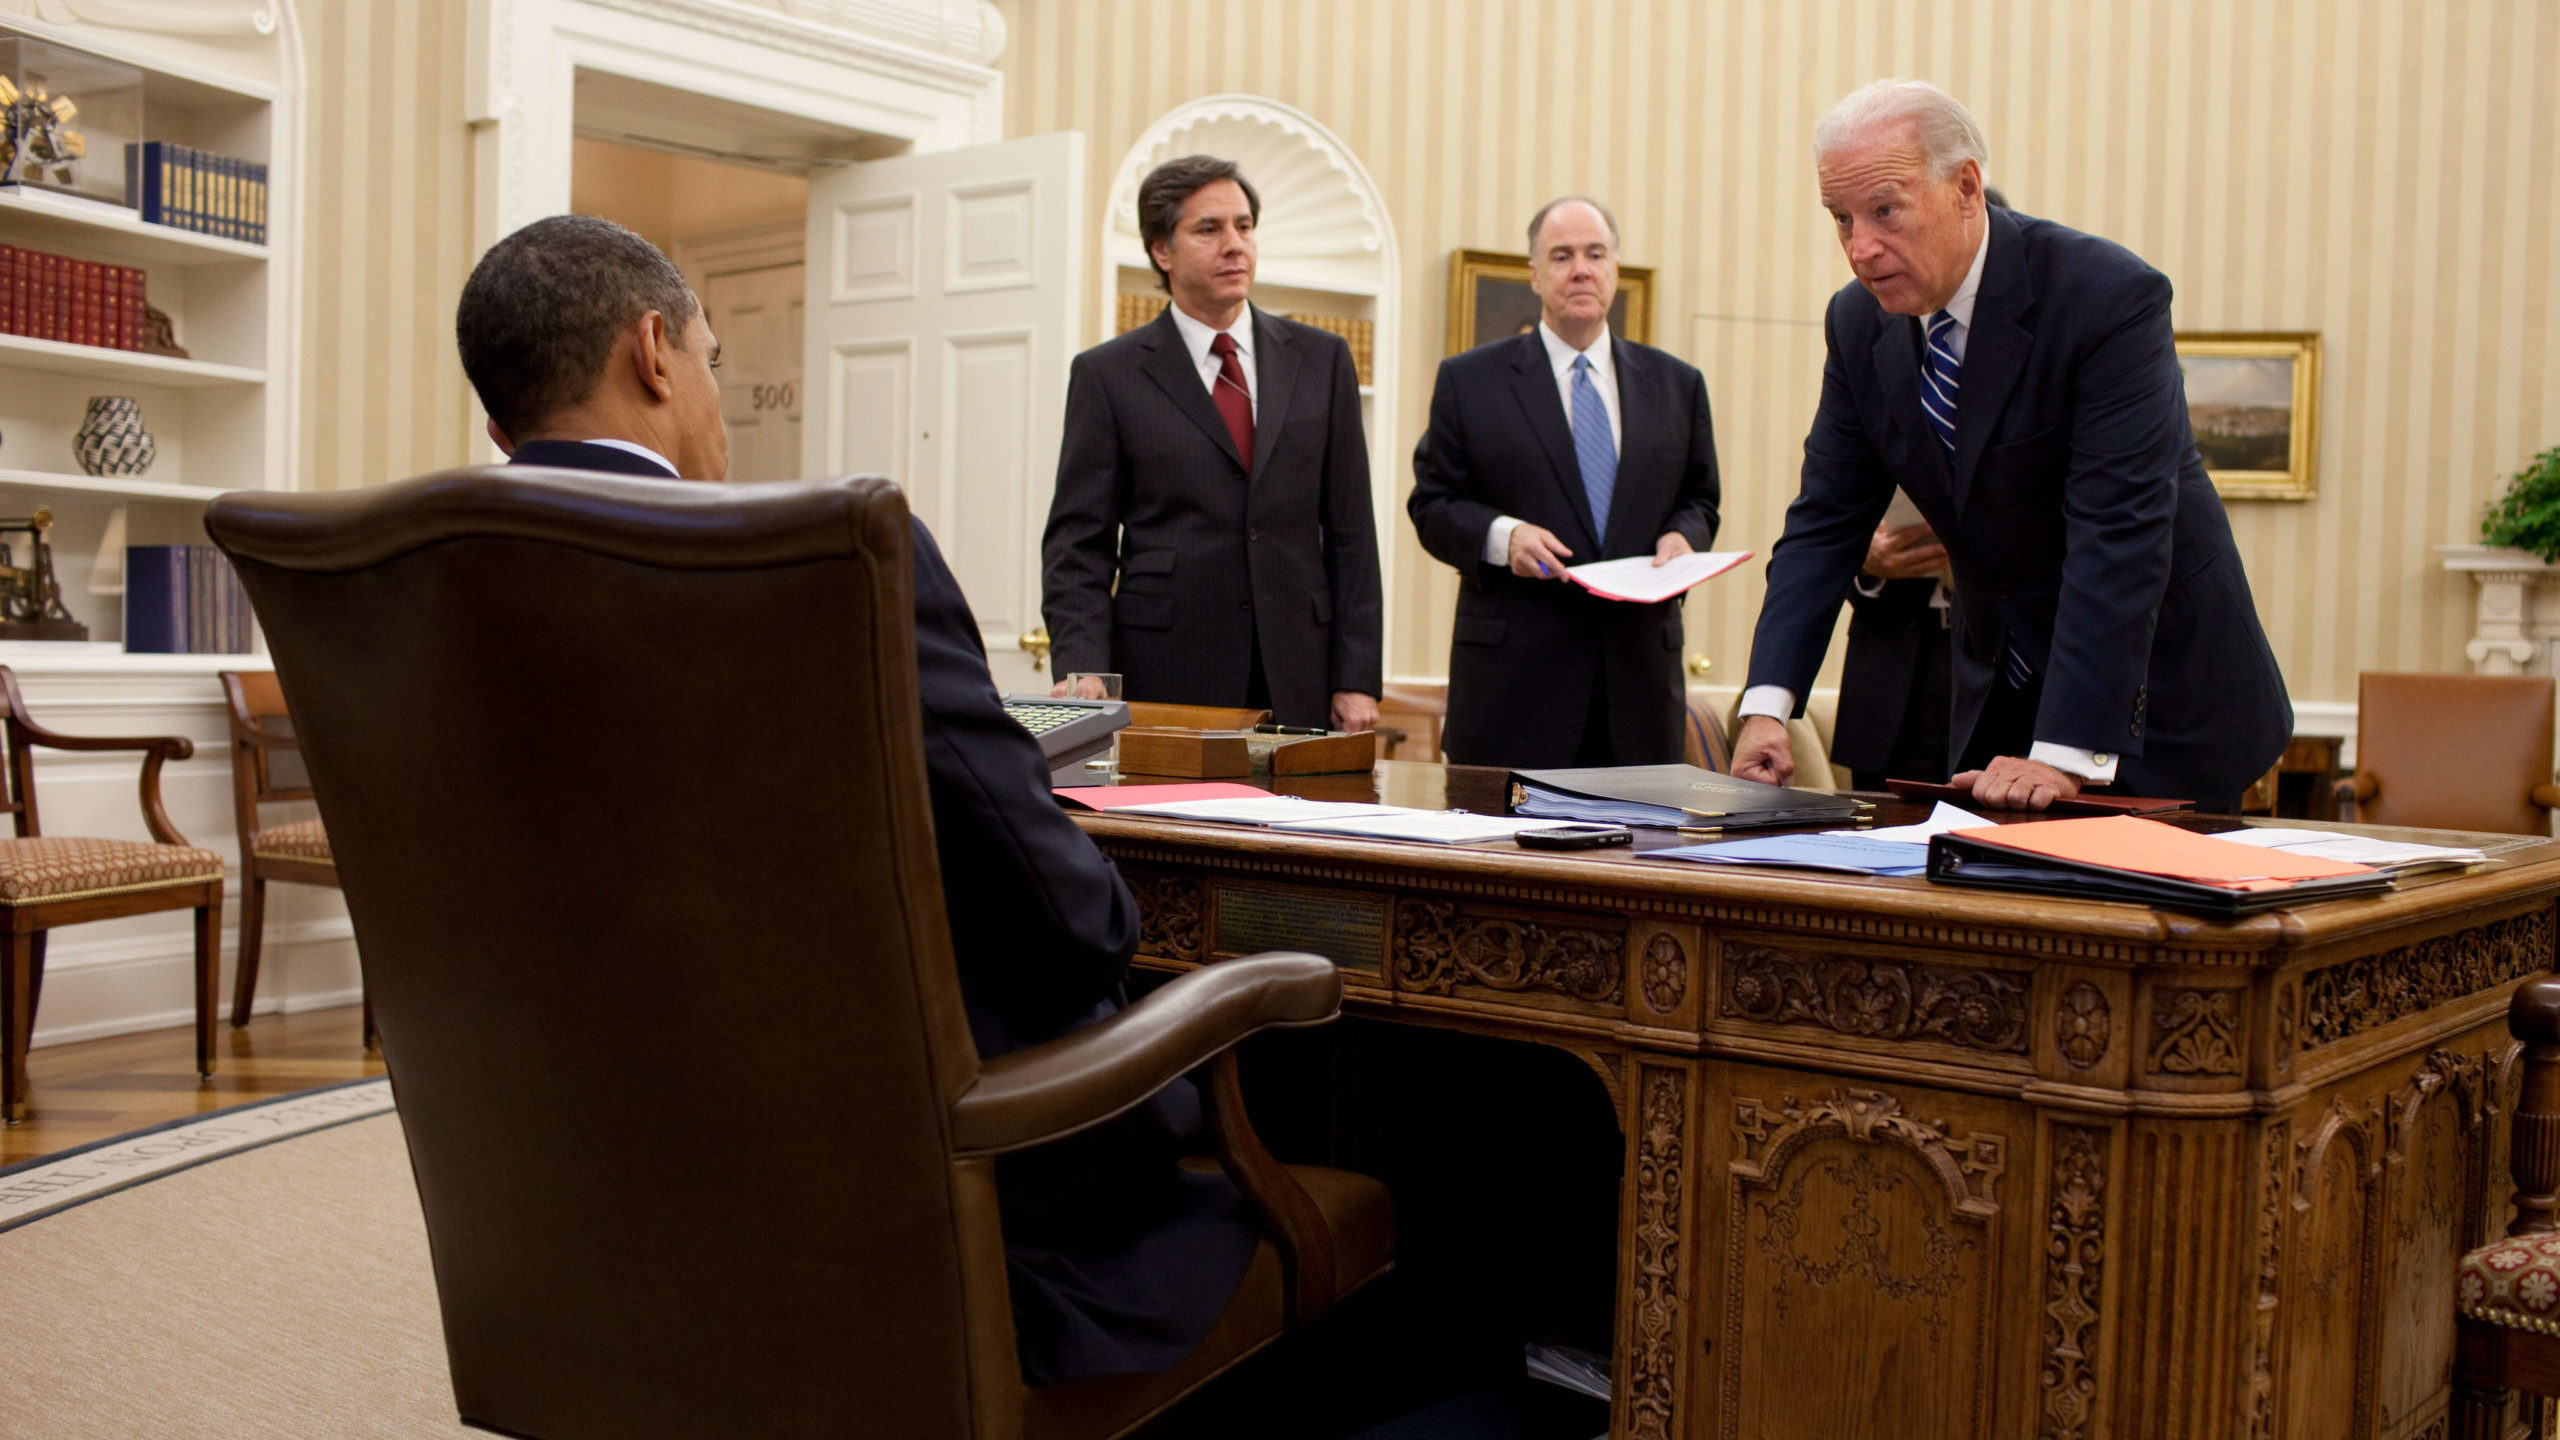 Is Biden Obama Redux in the Middle East?